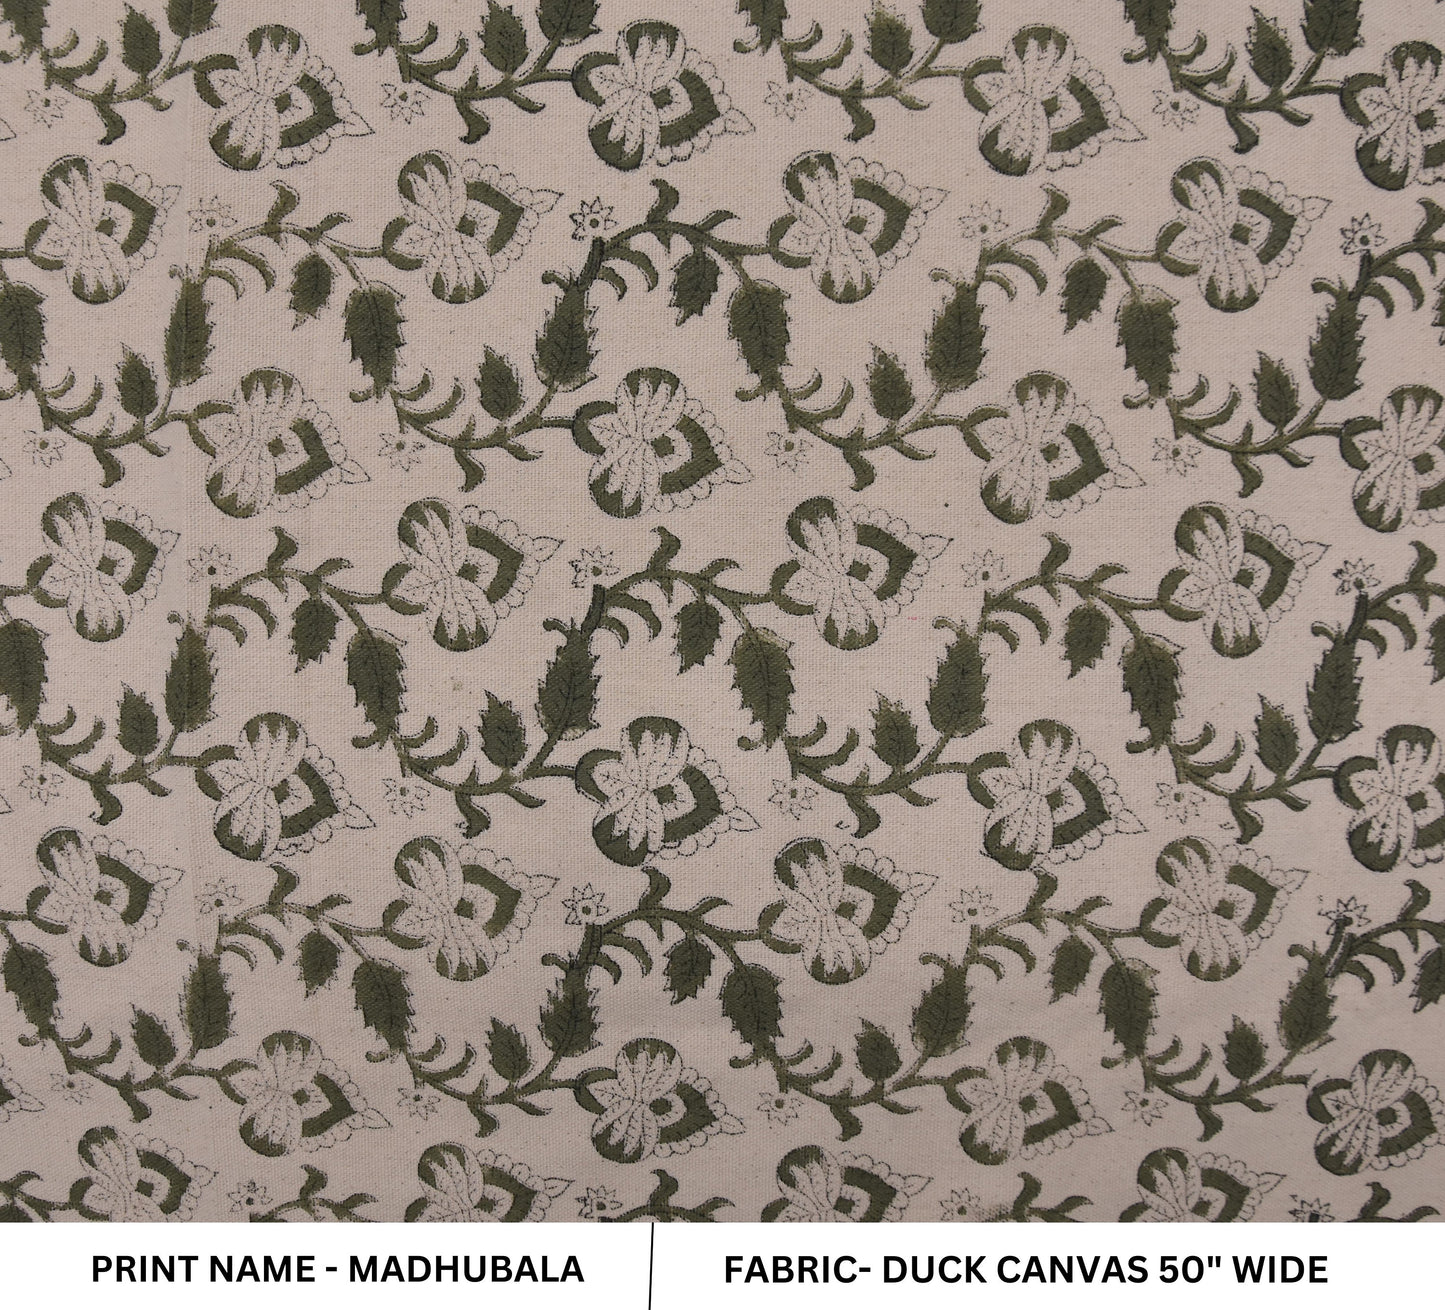 Block Print Duck Canvas 50" Wide - Handmade Indian Cushion Cover Decorative Curtain and Tablecloth with Floral Print Block - MADHUBALA